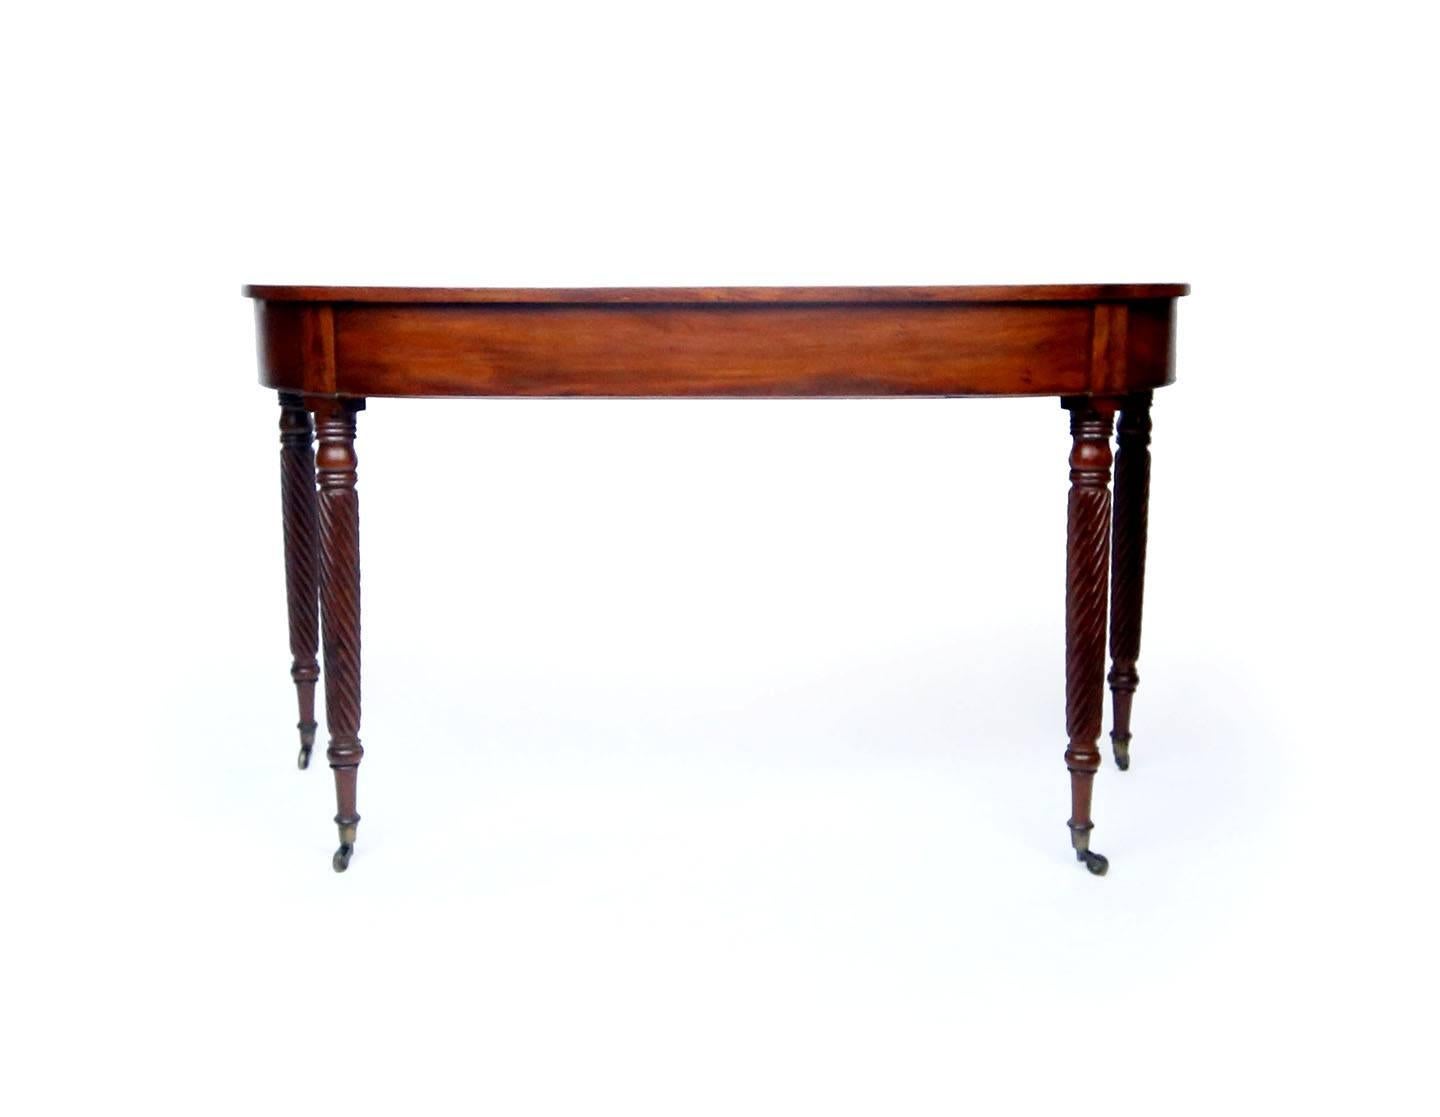 Beautiful early 19th century light mahogany table. Originally a set to form a banquet table, this table makes an excellent console or small sofa table. Four tapering legs carved with signature Allison spirals end in original castors. Workshop of